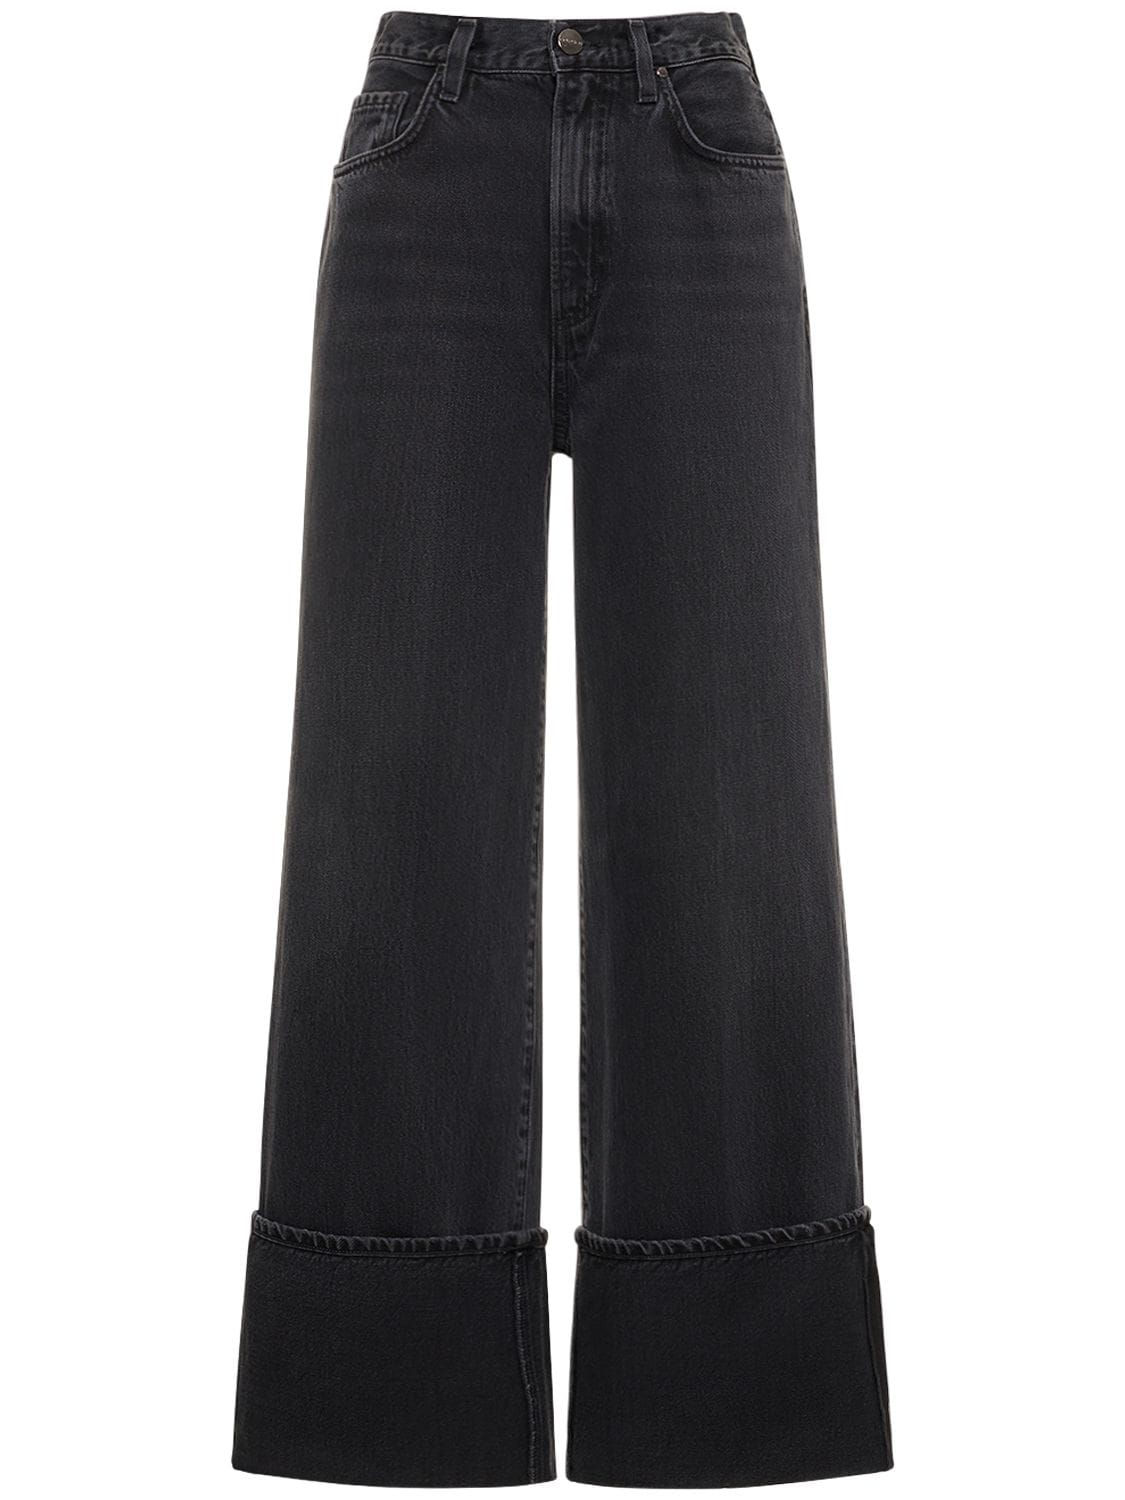 GOLDSIGN THE ASTLEY HIGH RISE WIDE DENIM JEANS